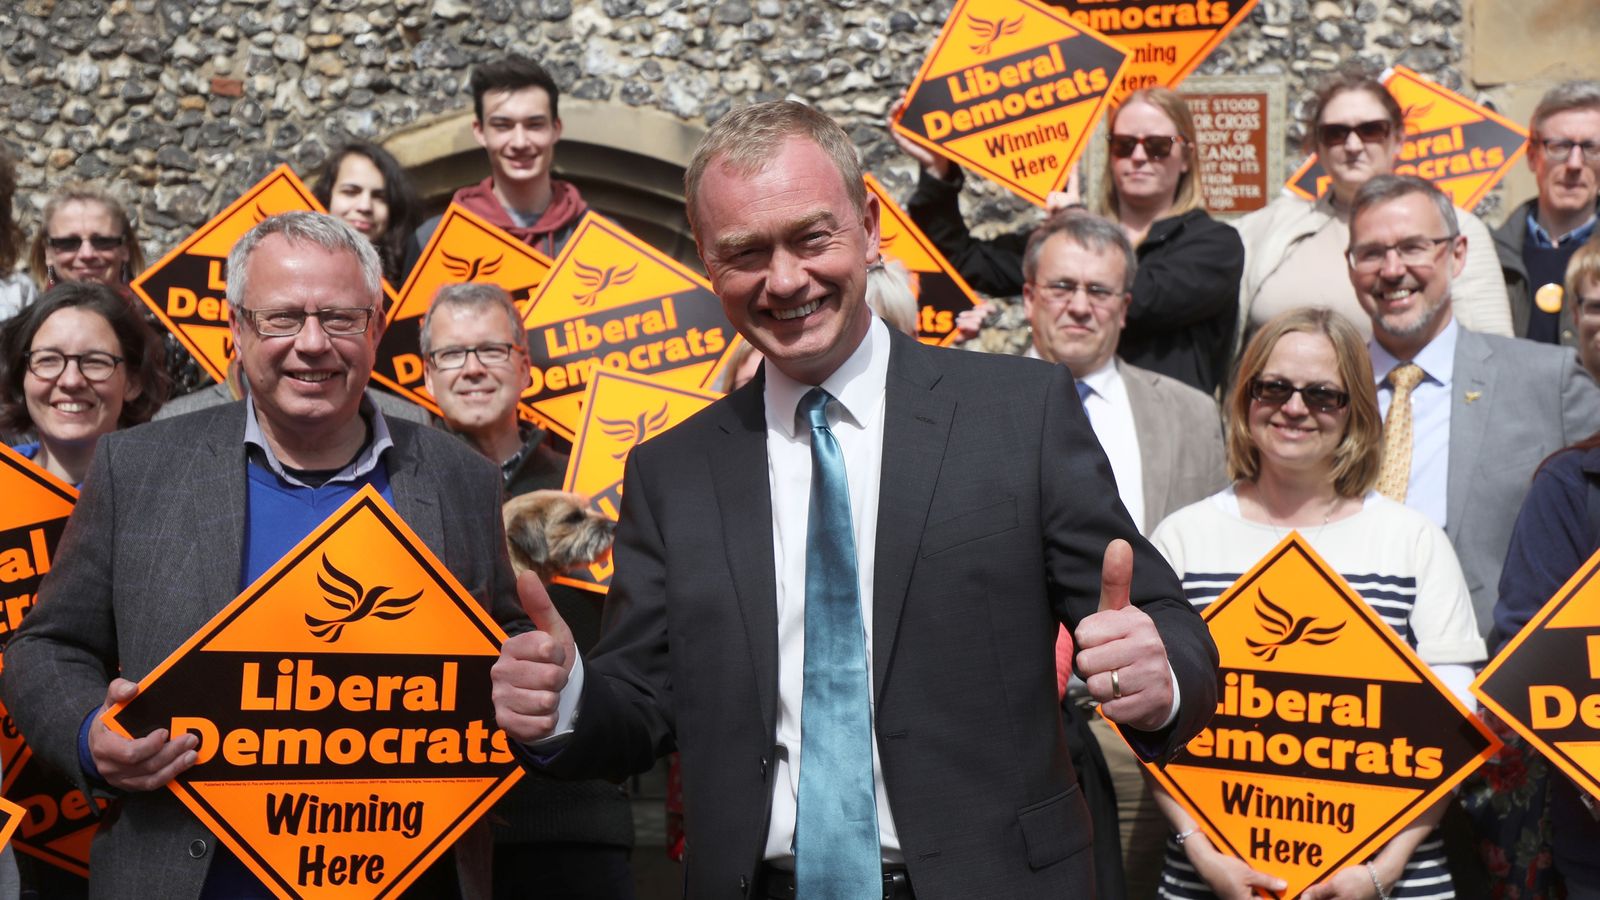 Lib Dems and Labour in fightback after Conservatives' success in local